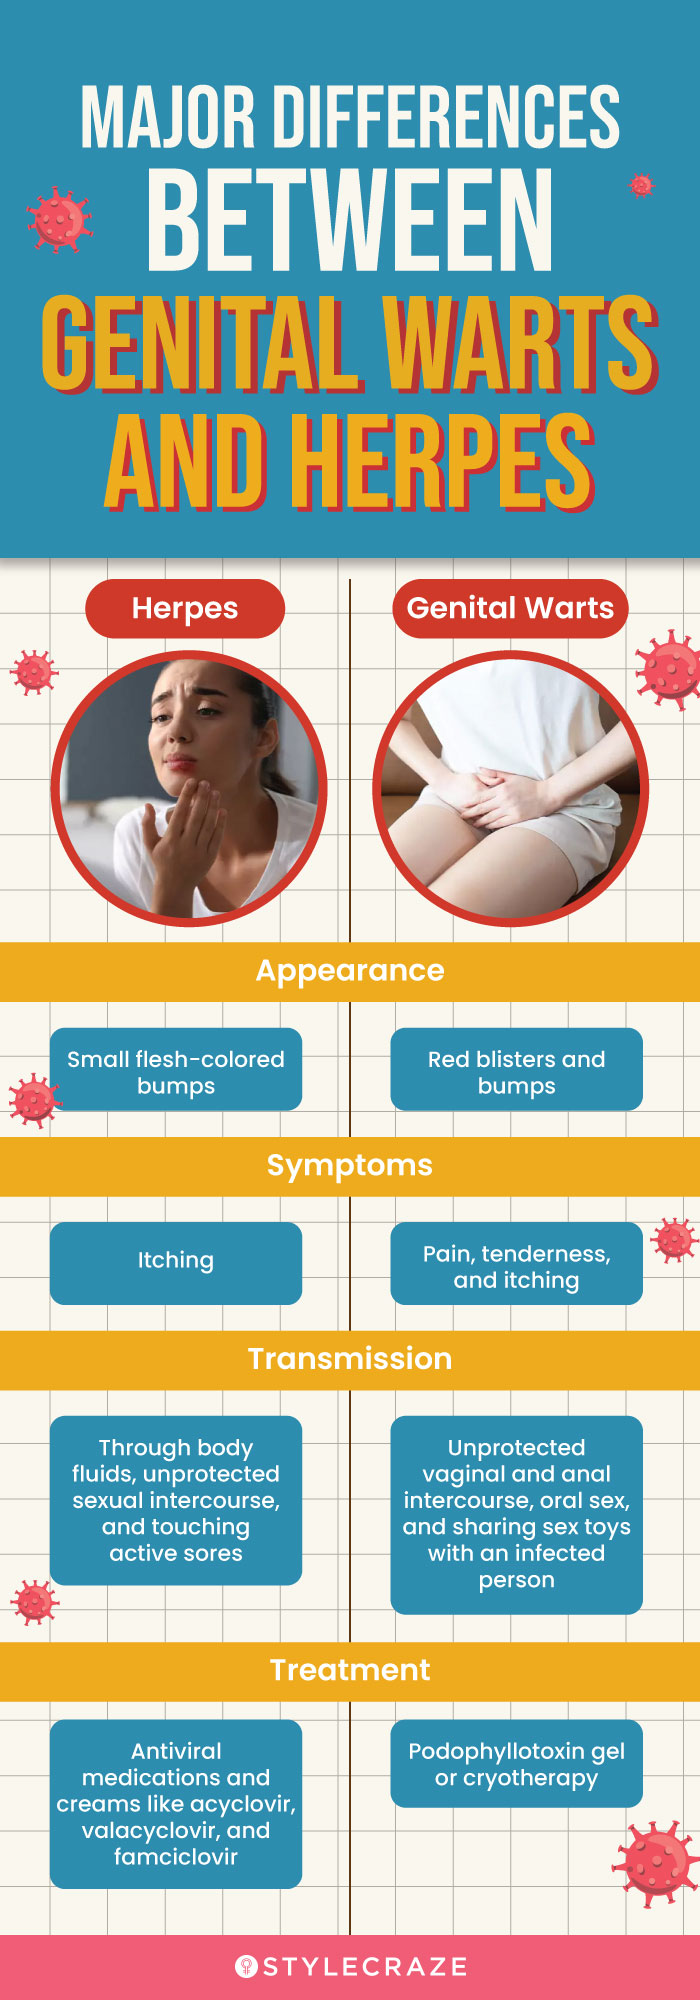 major differences between genital warts and herpes (infographic)